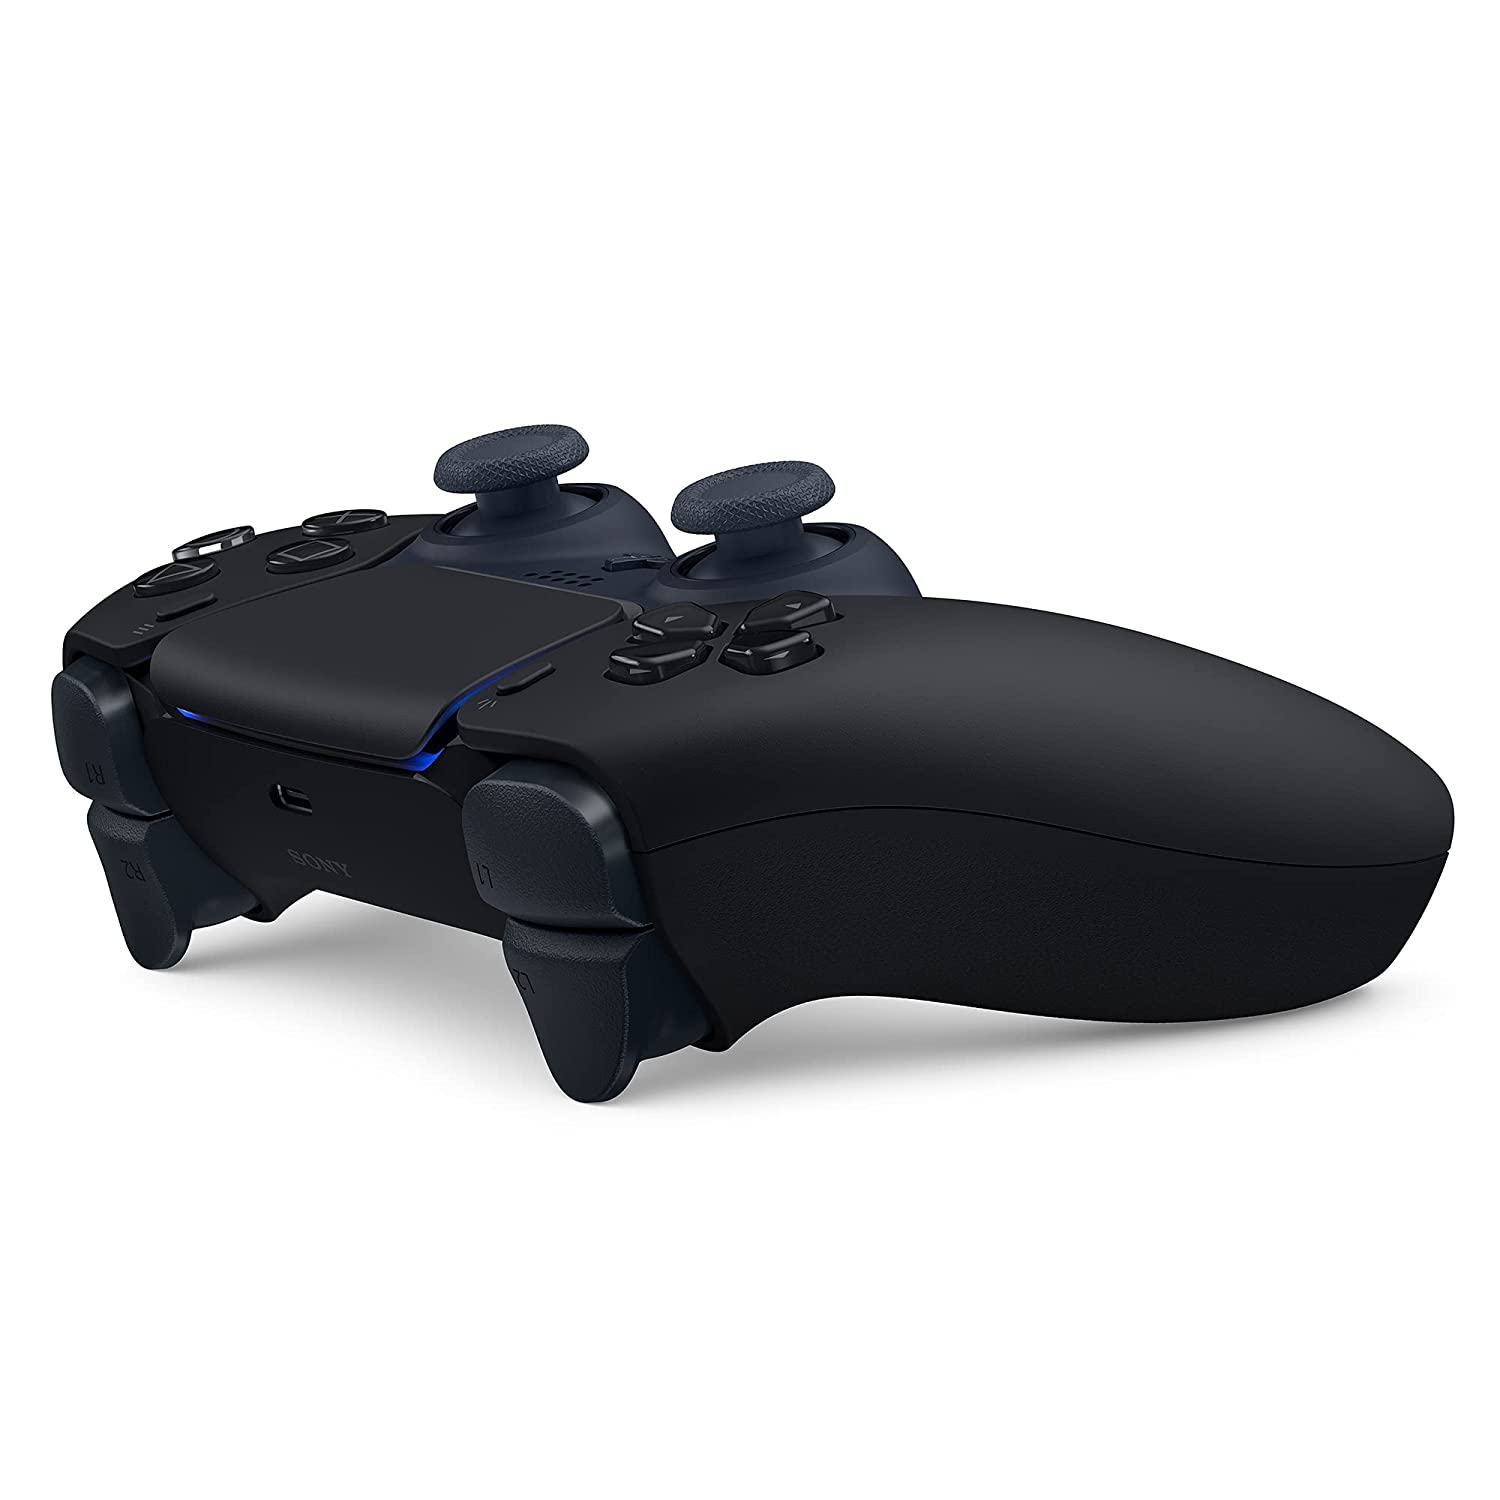 Sony Playstation 5 Disc Version with Extra Midnight Black Controller Bundle - Pro-Distributing